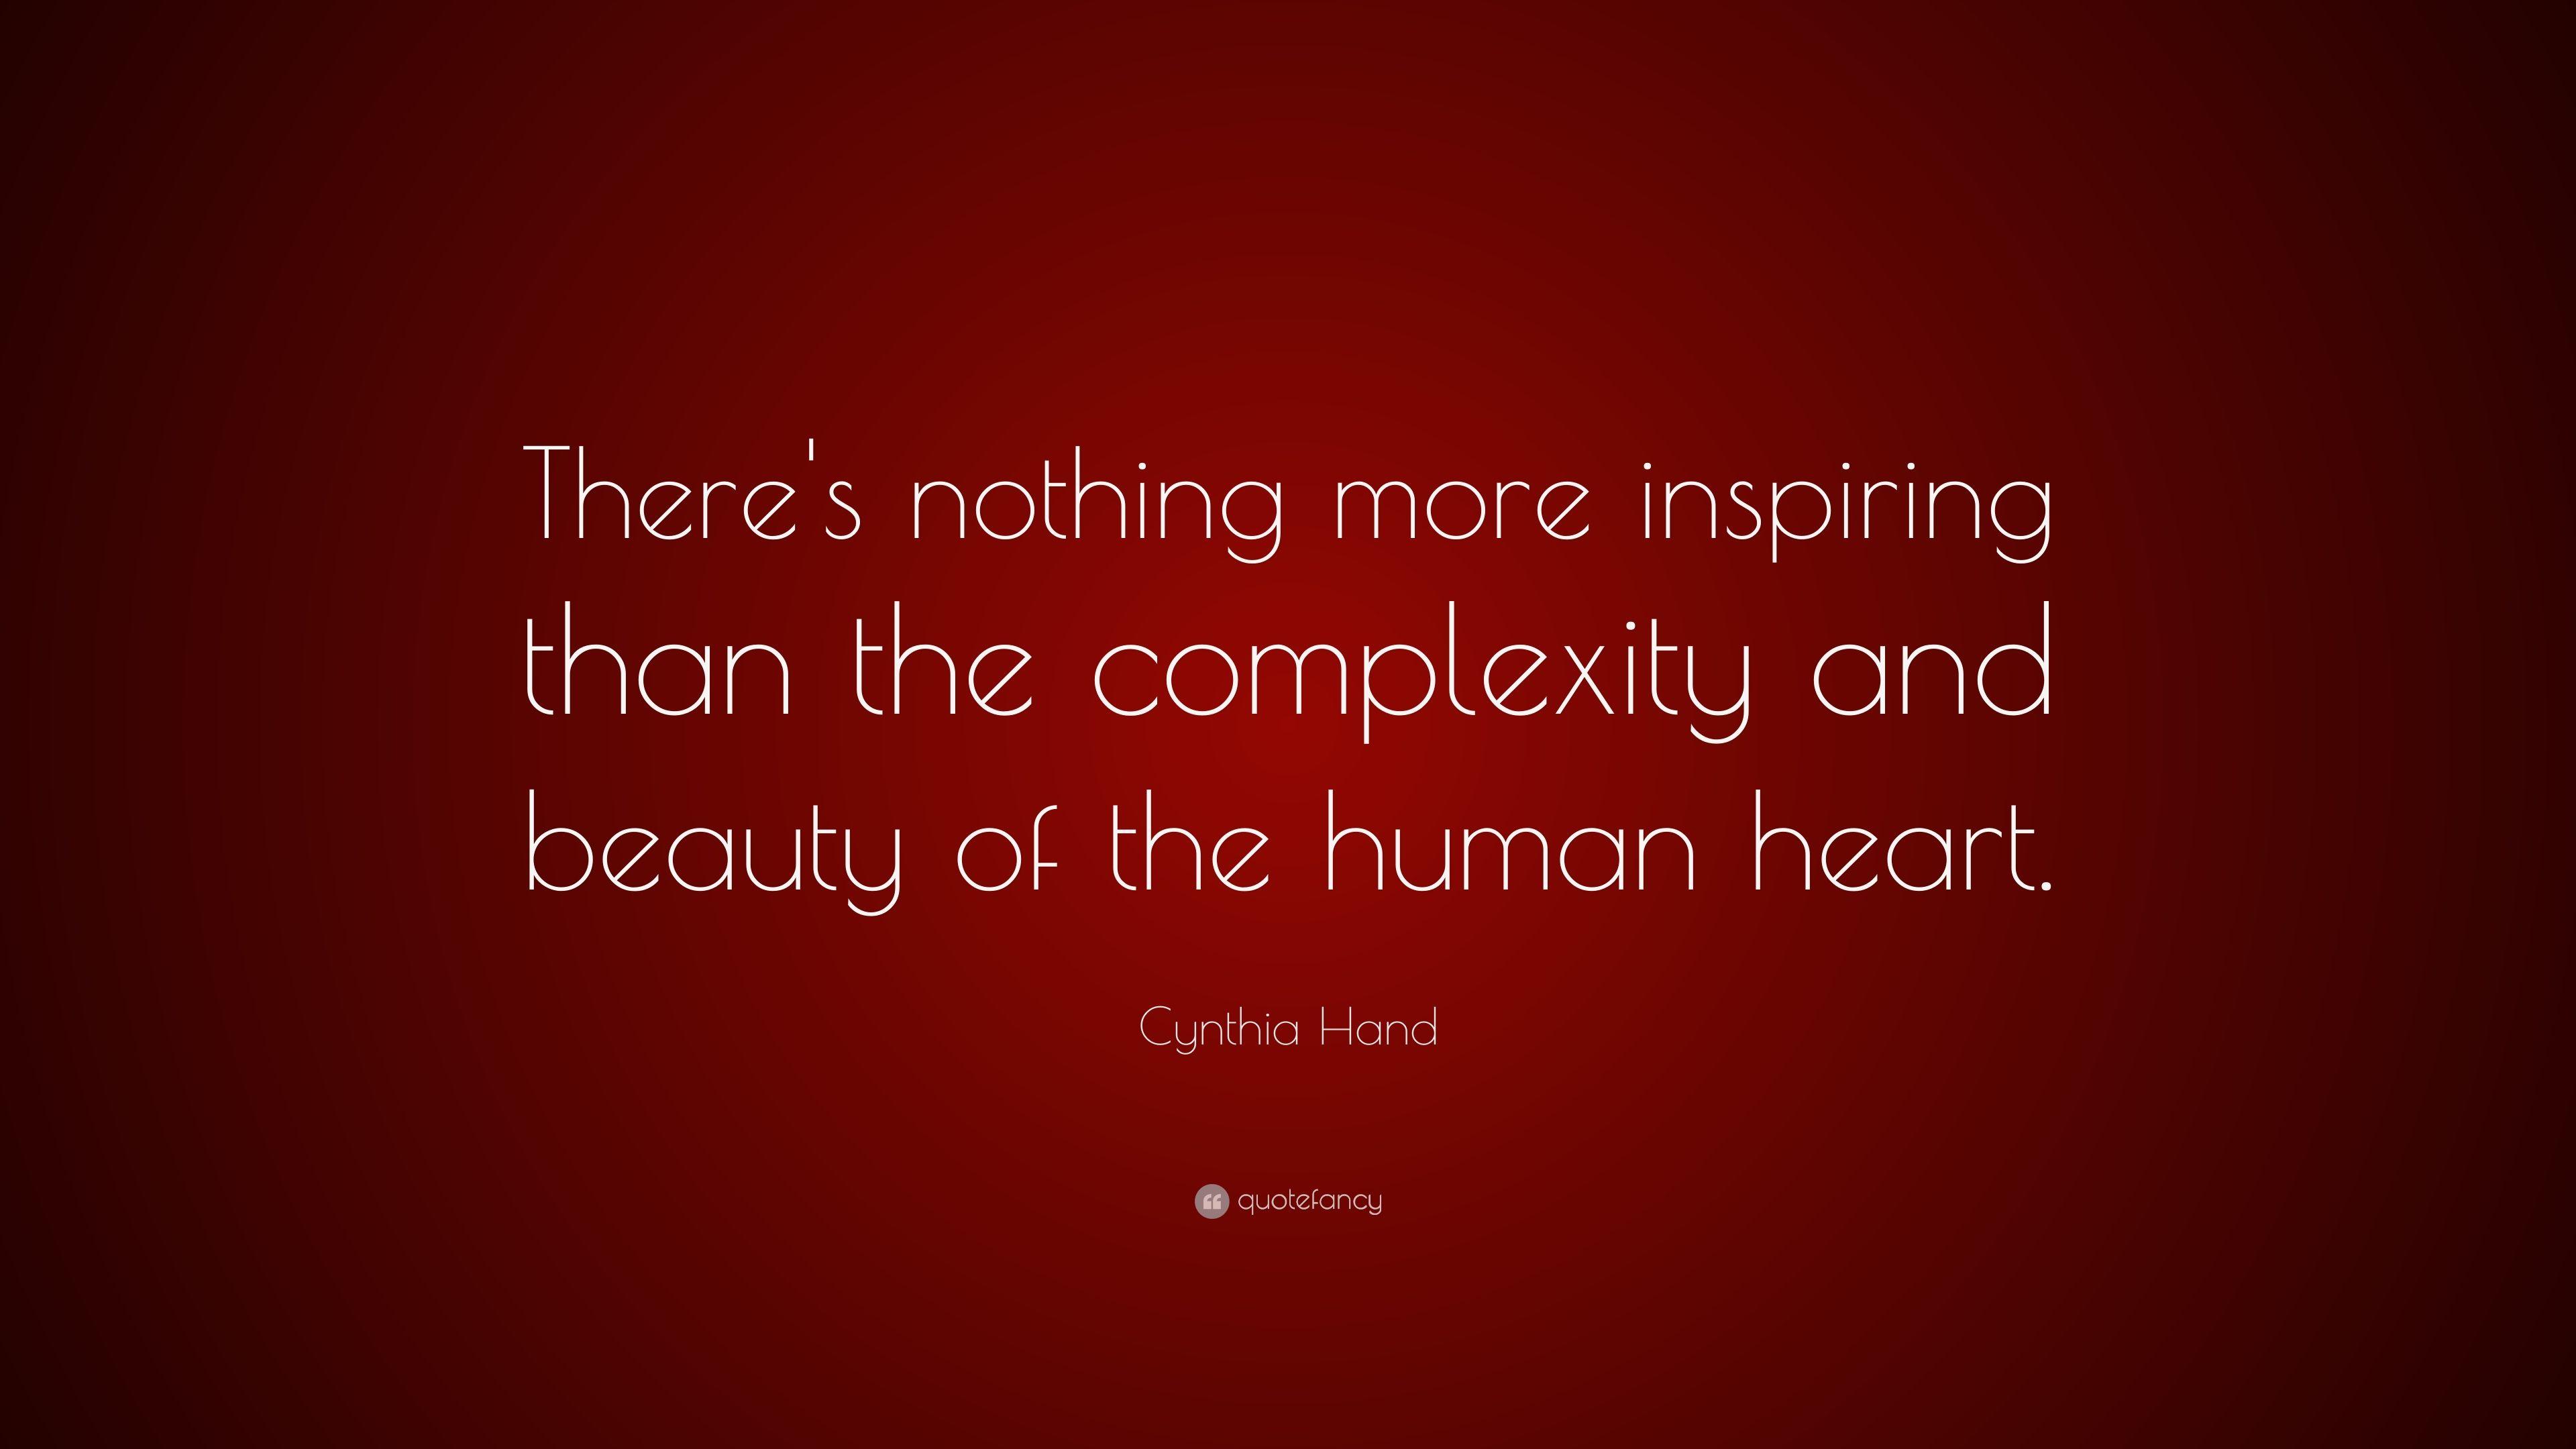 Cynthia Hand Quote: “There's nothing more inspiring than